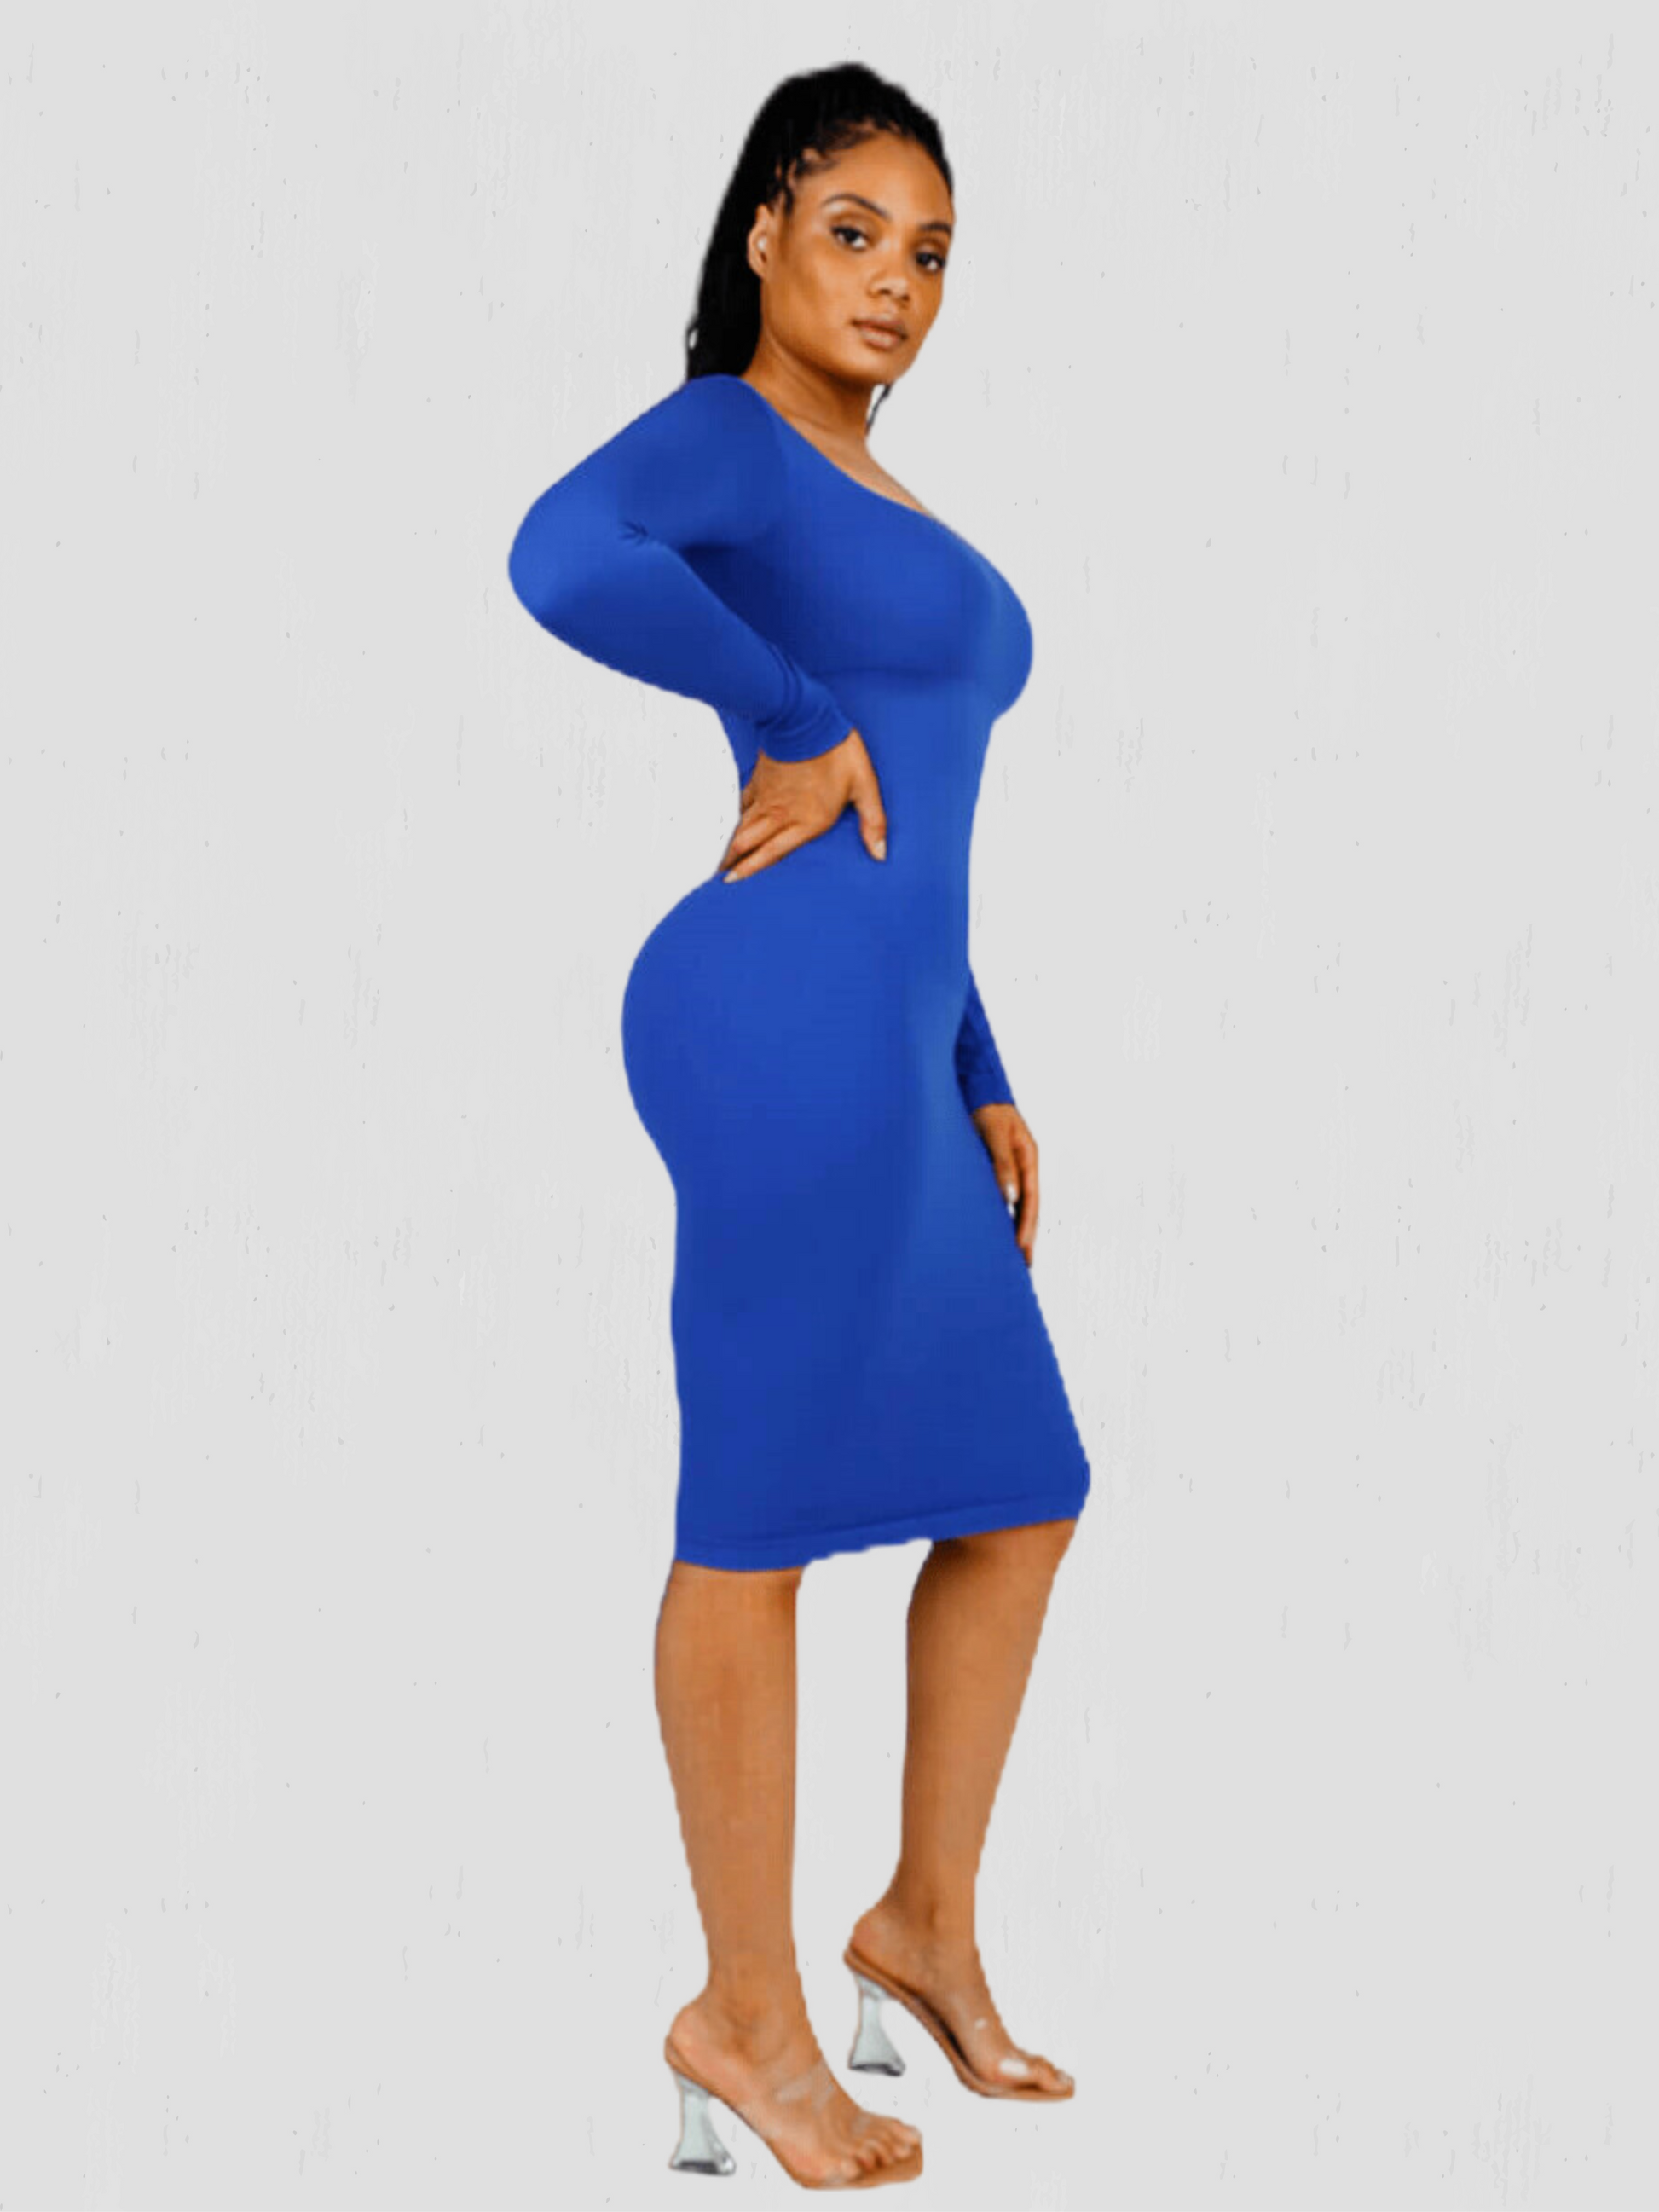 Long-Sleeved Shaping Dress with Built-In Shapewear – BodyFlexx